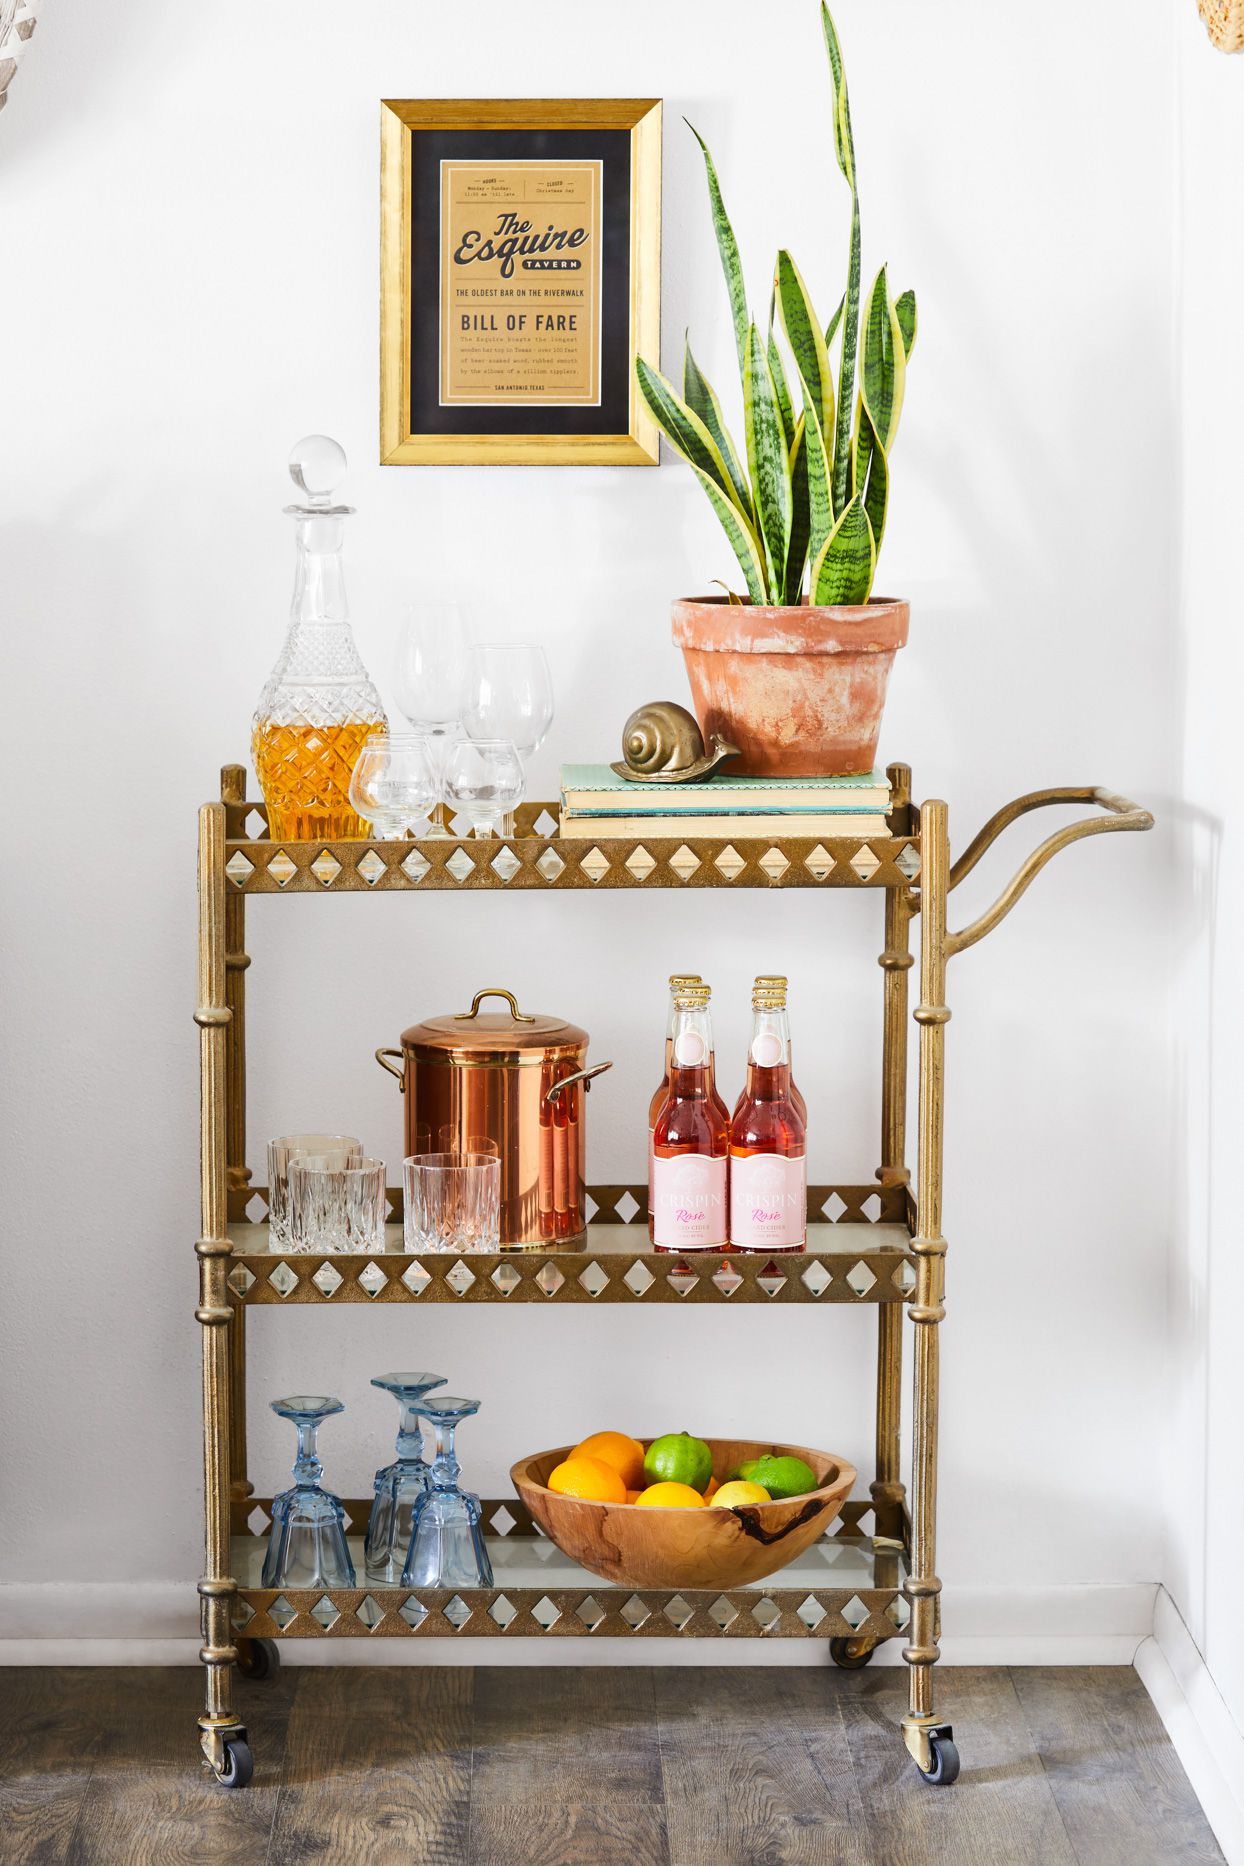 Bar cart ideas and styling tips – 16 ways to get the party started